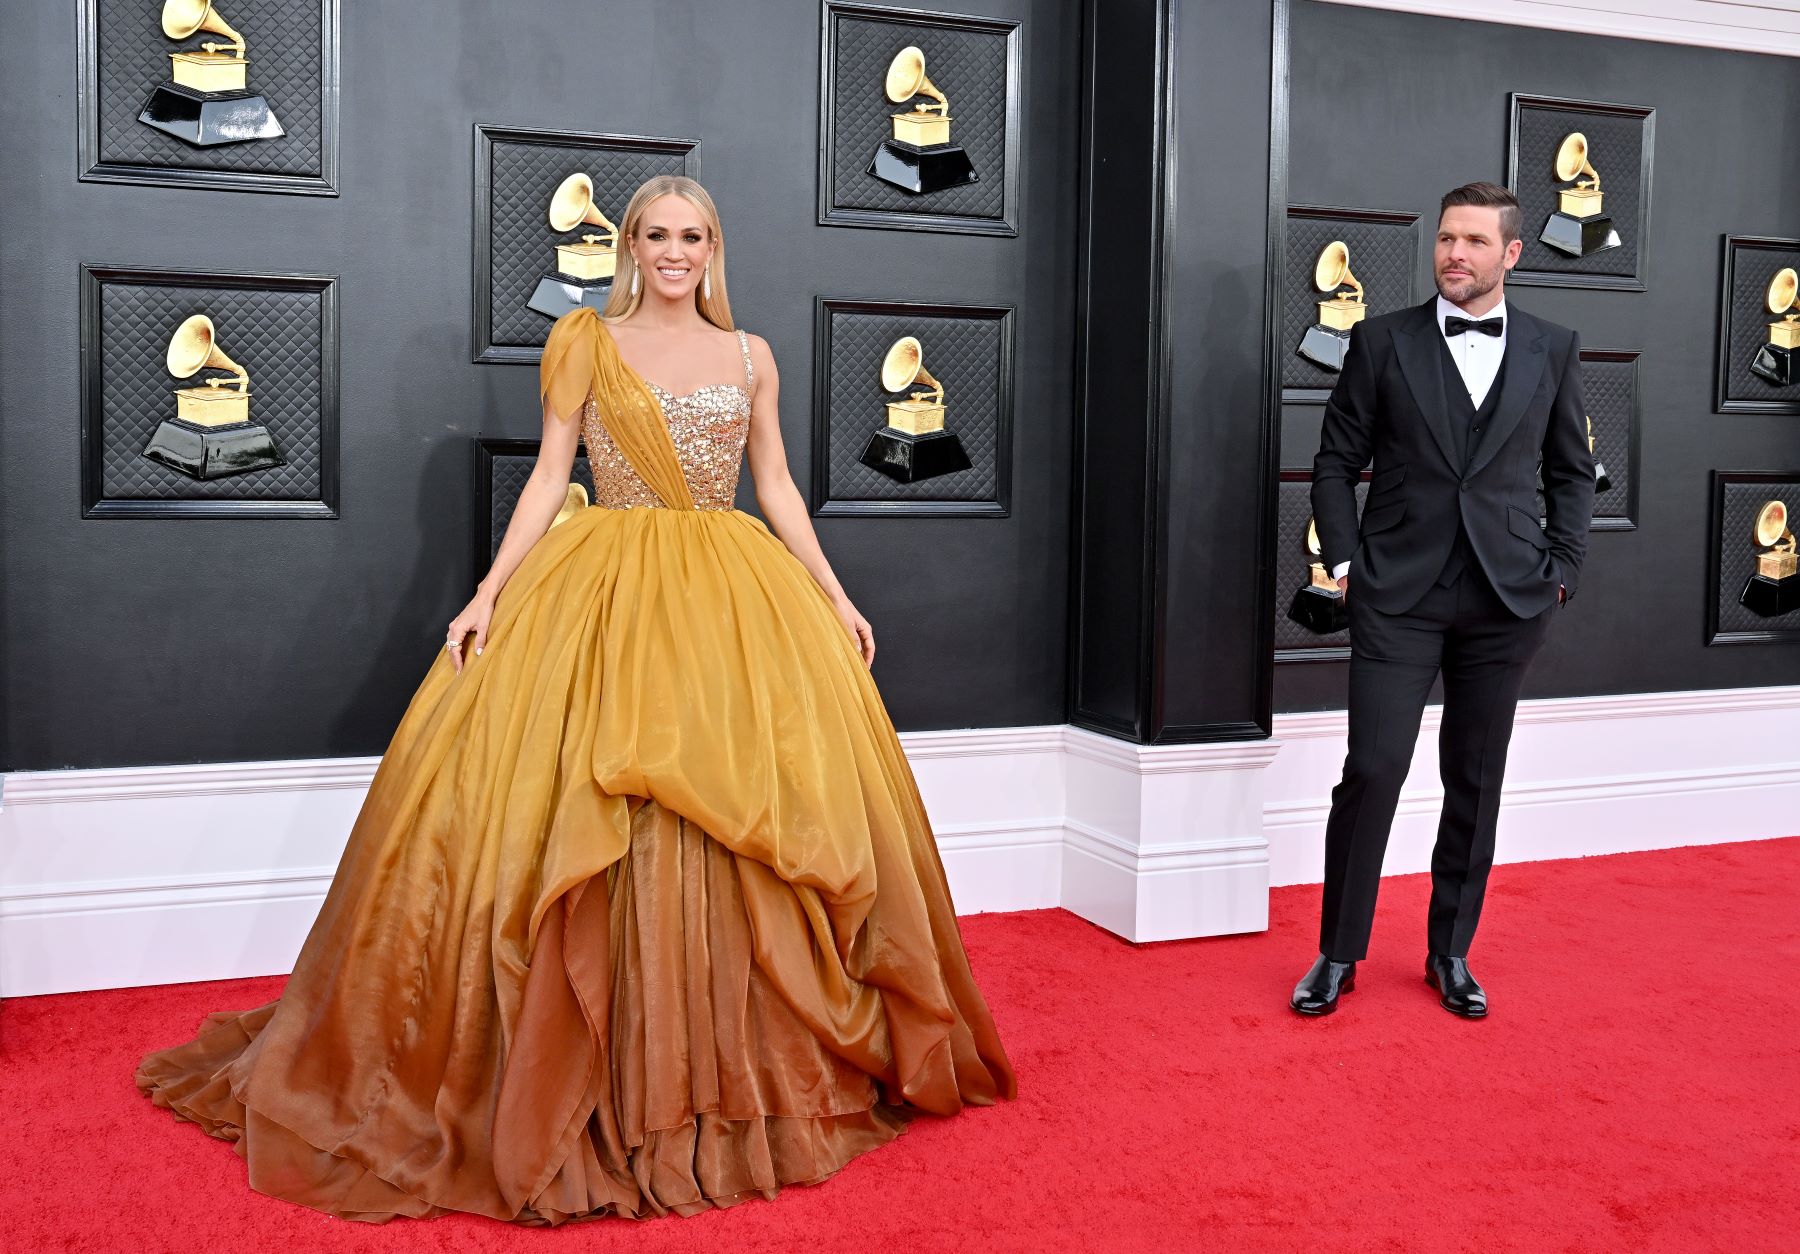 Carrie Underwood's Best Red Carpet Style + Fashion: PHOTOS